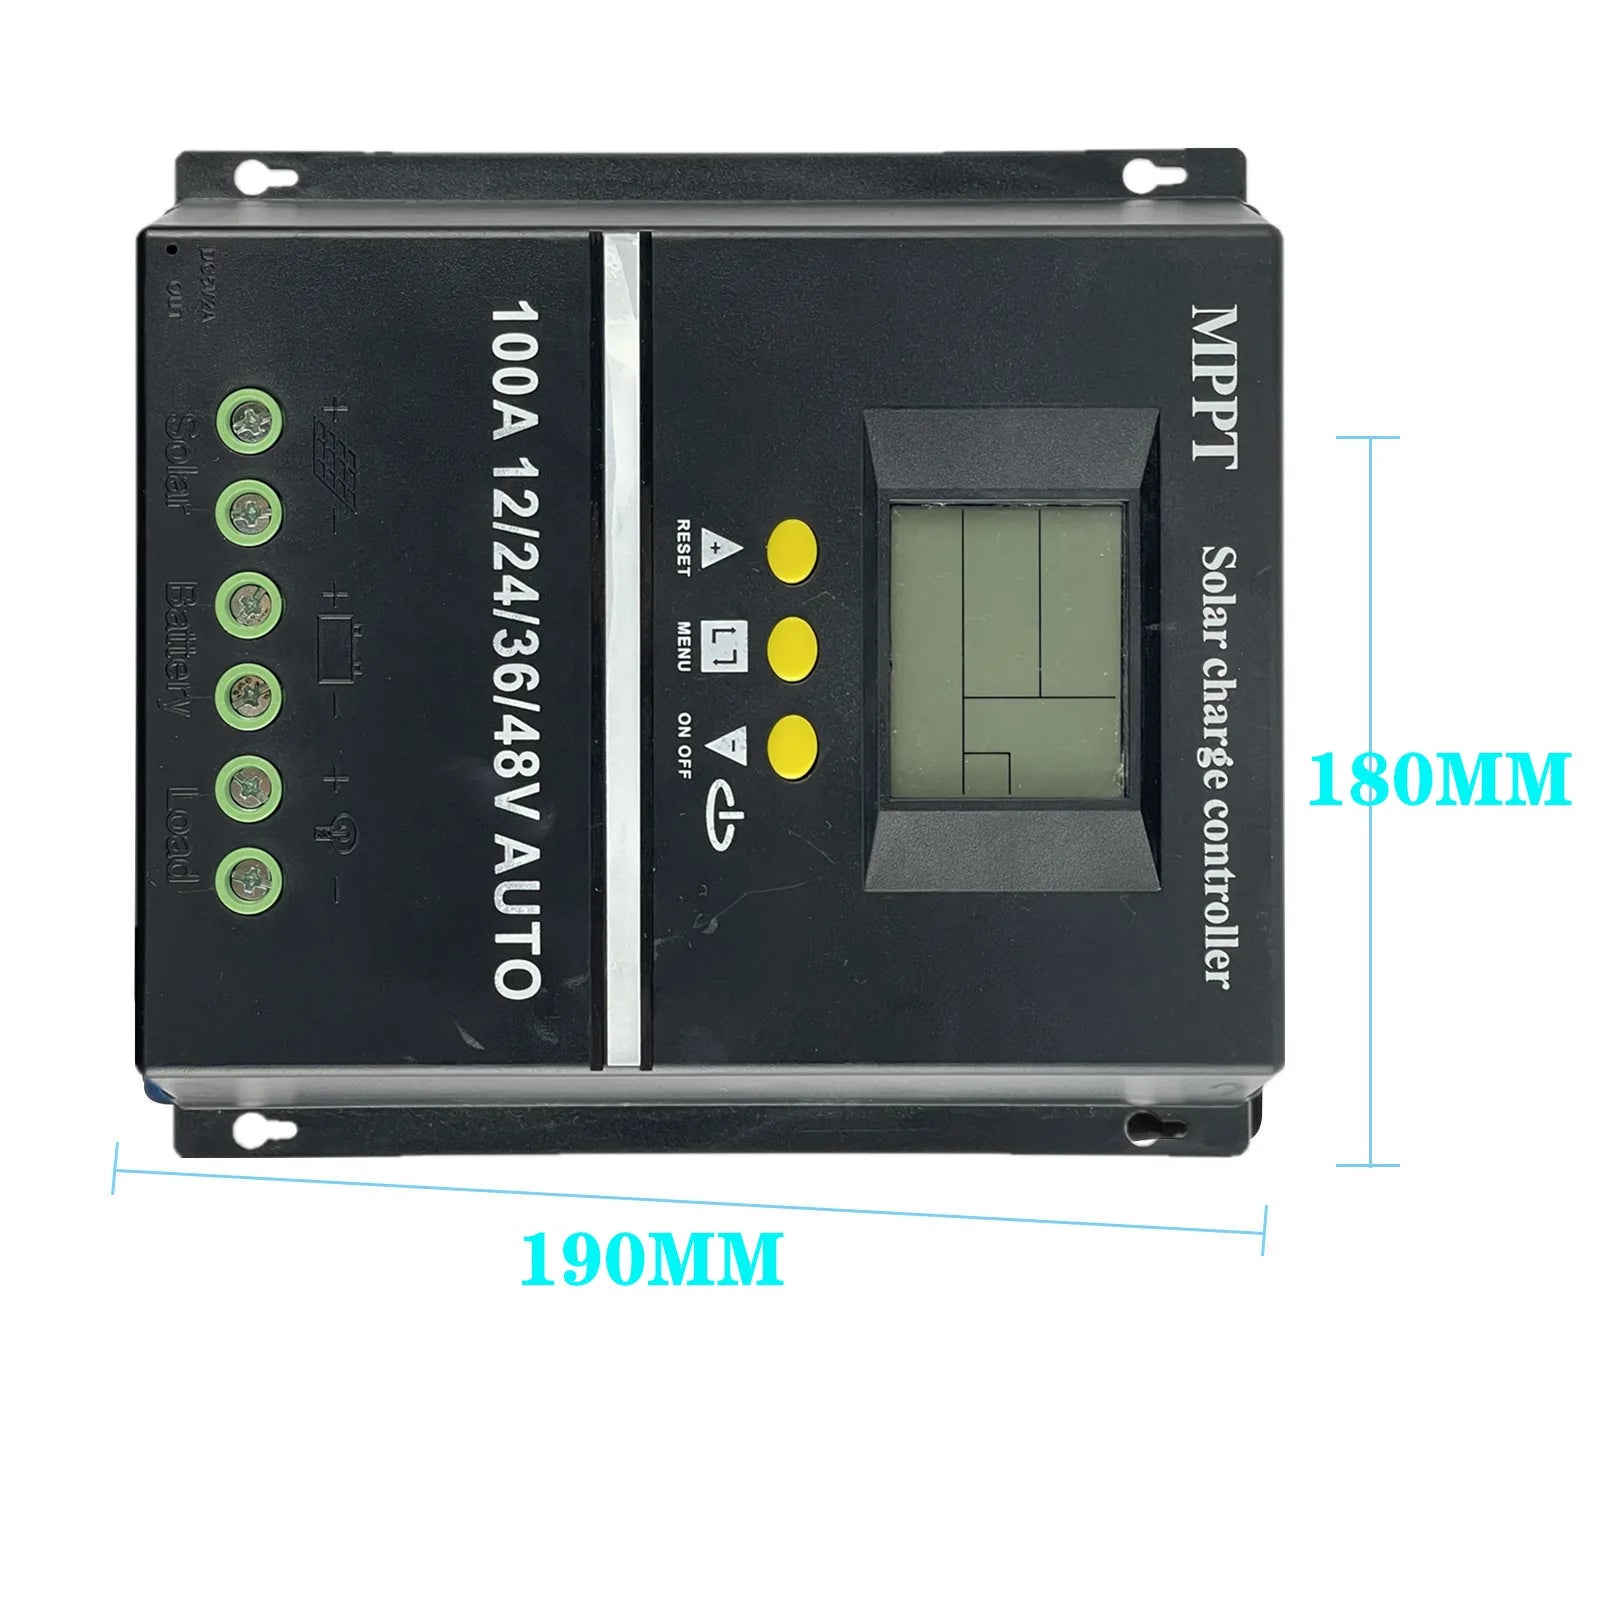 Auto solar charge controller with LCD display and dual USB ports for solar power system monitoring.